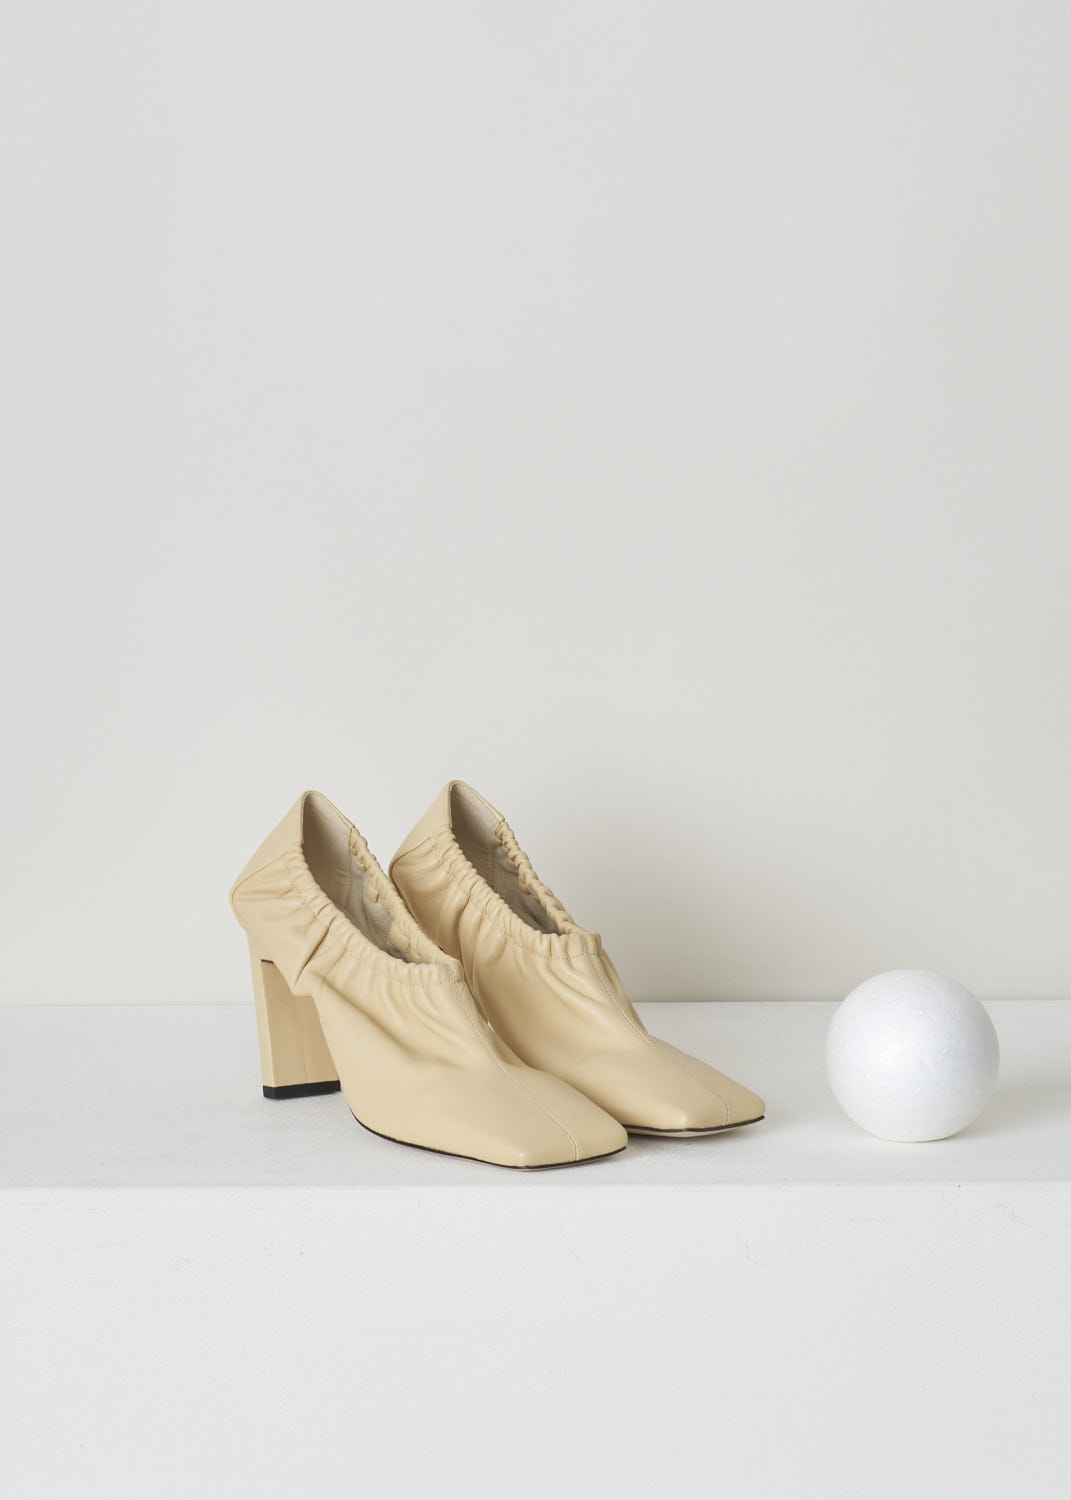 WANDLER, NUDE HEELED MULE WITH ELASTICATED DETAIL, MIA_MULE_21204_221201_1256_CASHEW, Beige, Front, These nude slip-on mule feature a gathered/wrinkled elasticated band around the ankle, a square toe and a block heel.

Heel height: 8.5 cm / 3.3 inch 
